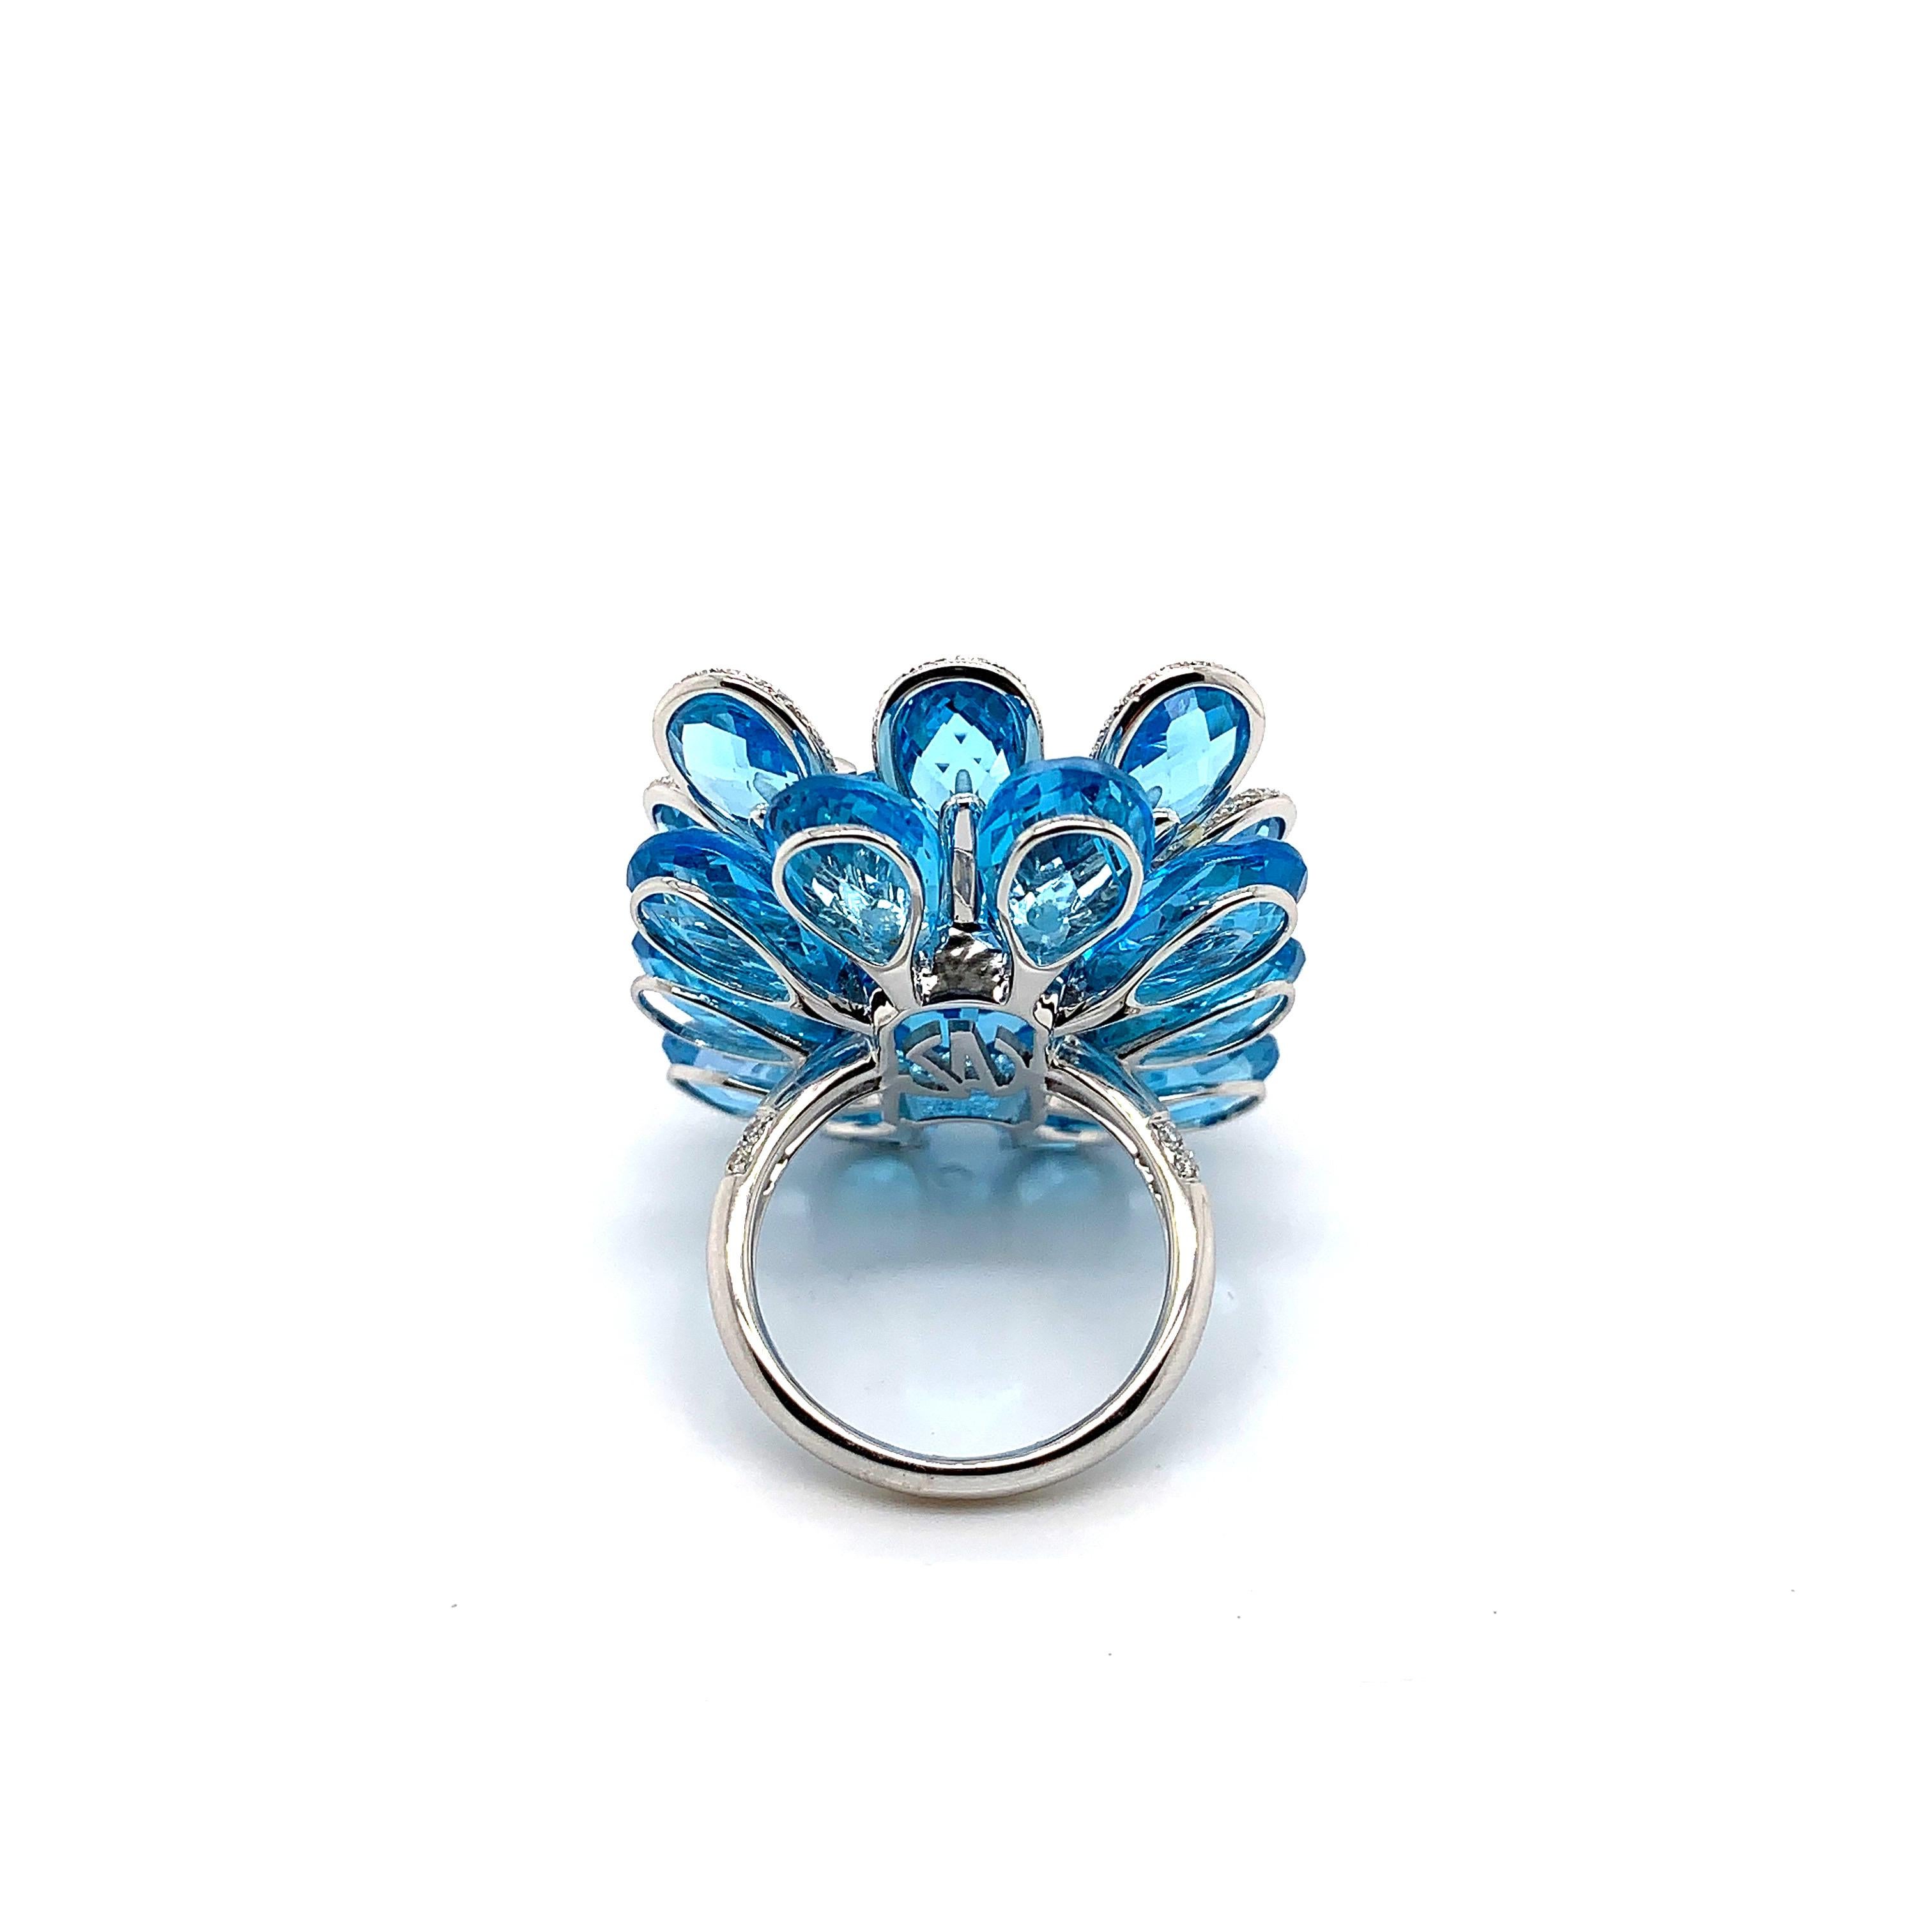 21.5 Carat Blue Topaz and Diamond Floral Ring in 18 Karat White Gold For Sale 3